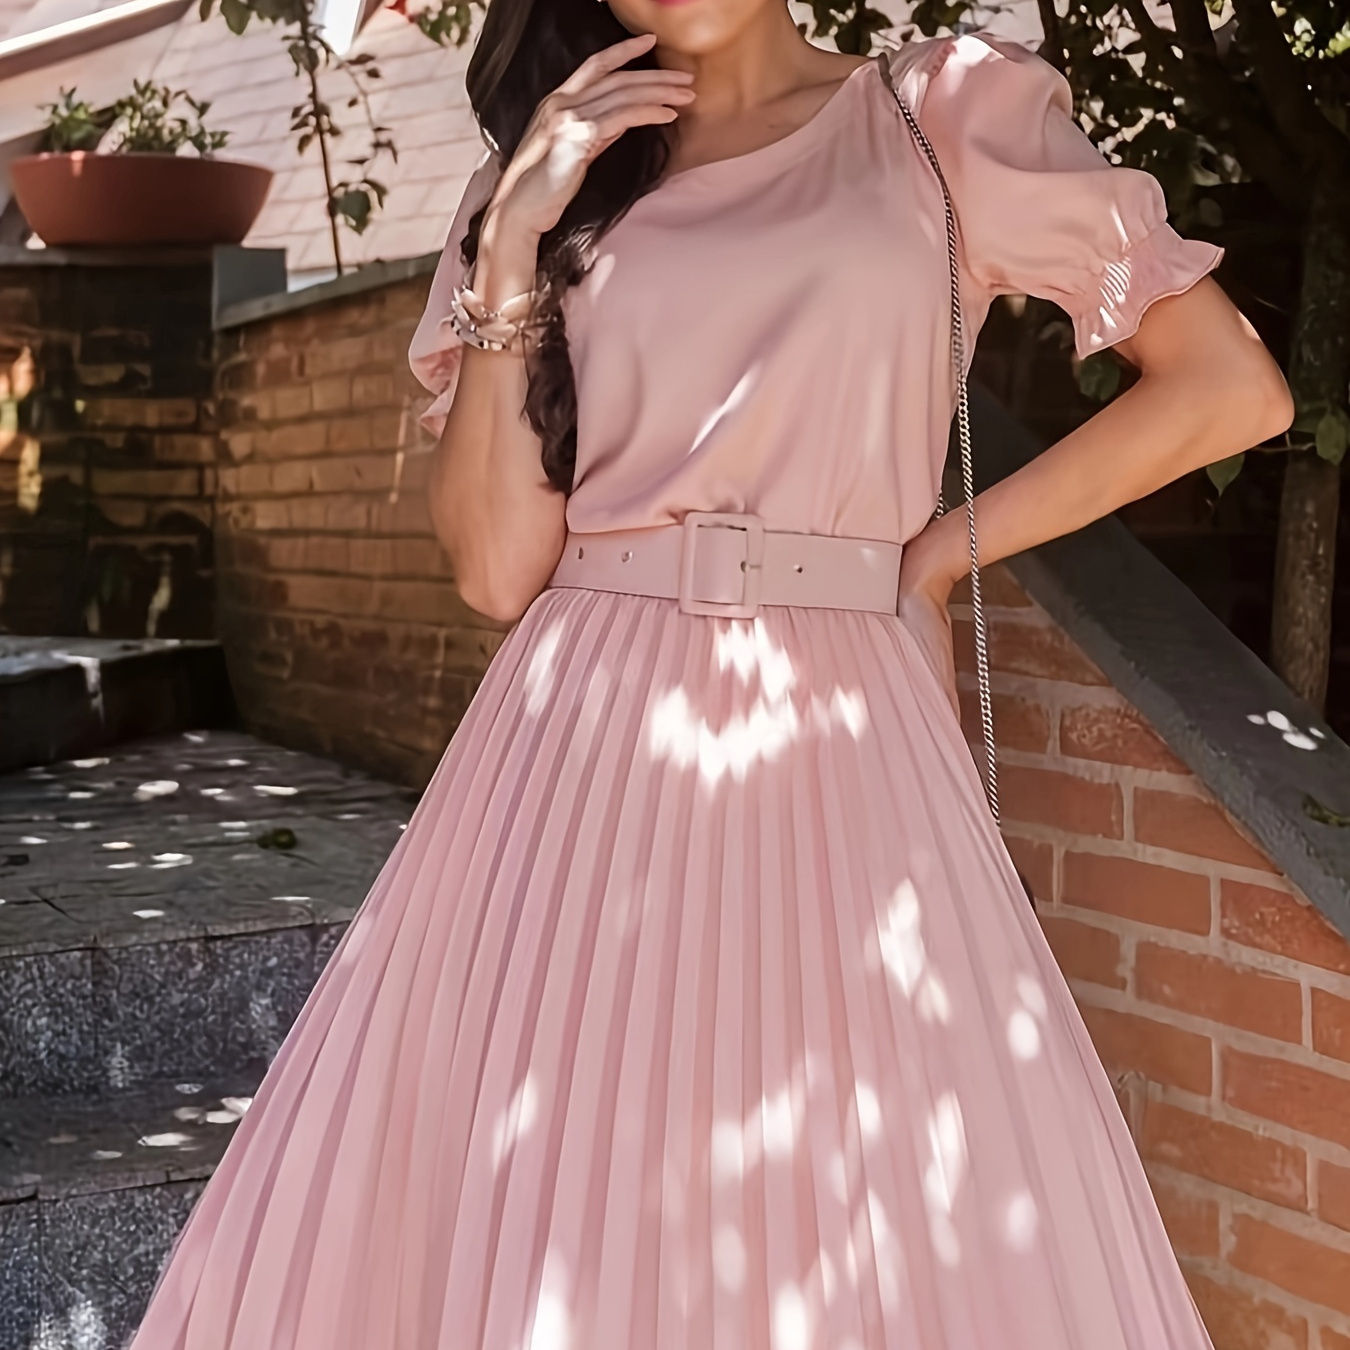 

Solid Color Crew Neck Dress, Elegant Puff Sleeve Pleated A-line Dress For Spring & Fall, Women's Clothing For Elegant Dressing